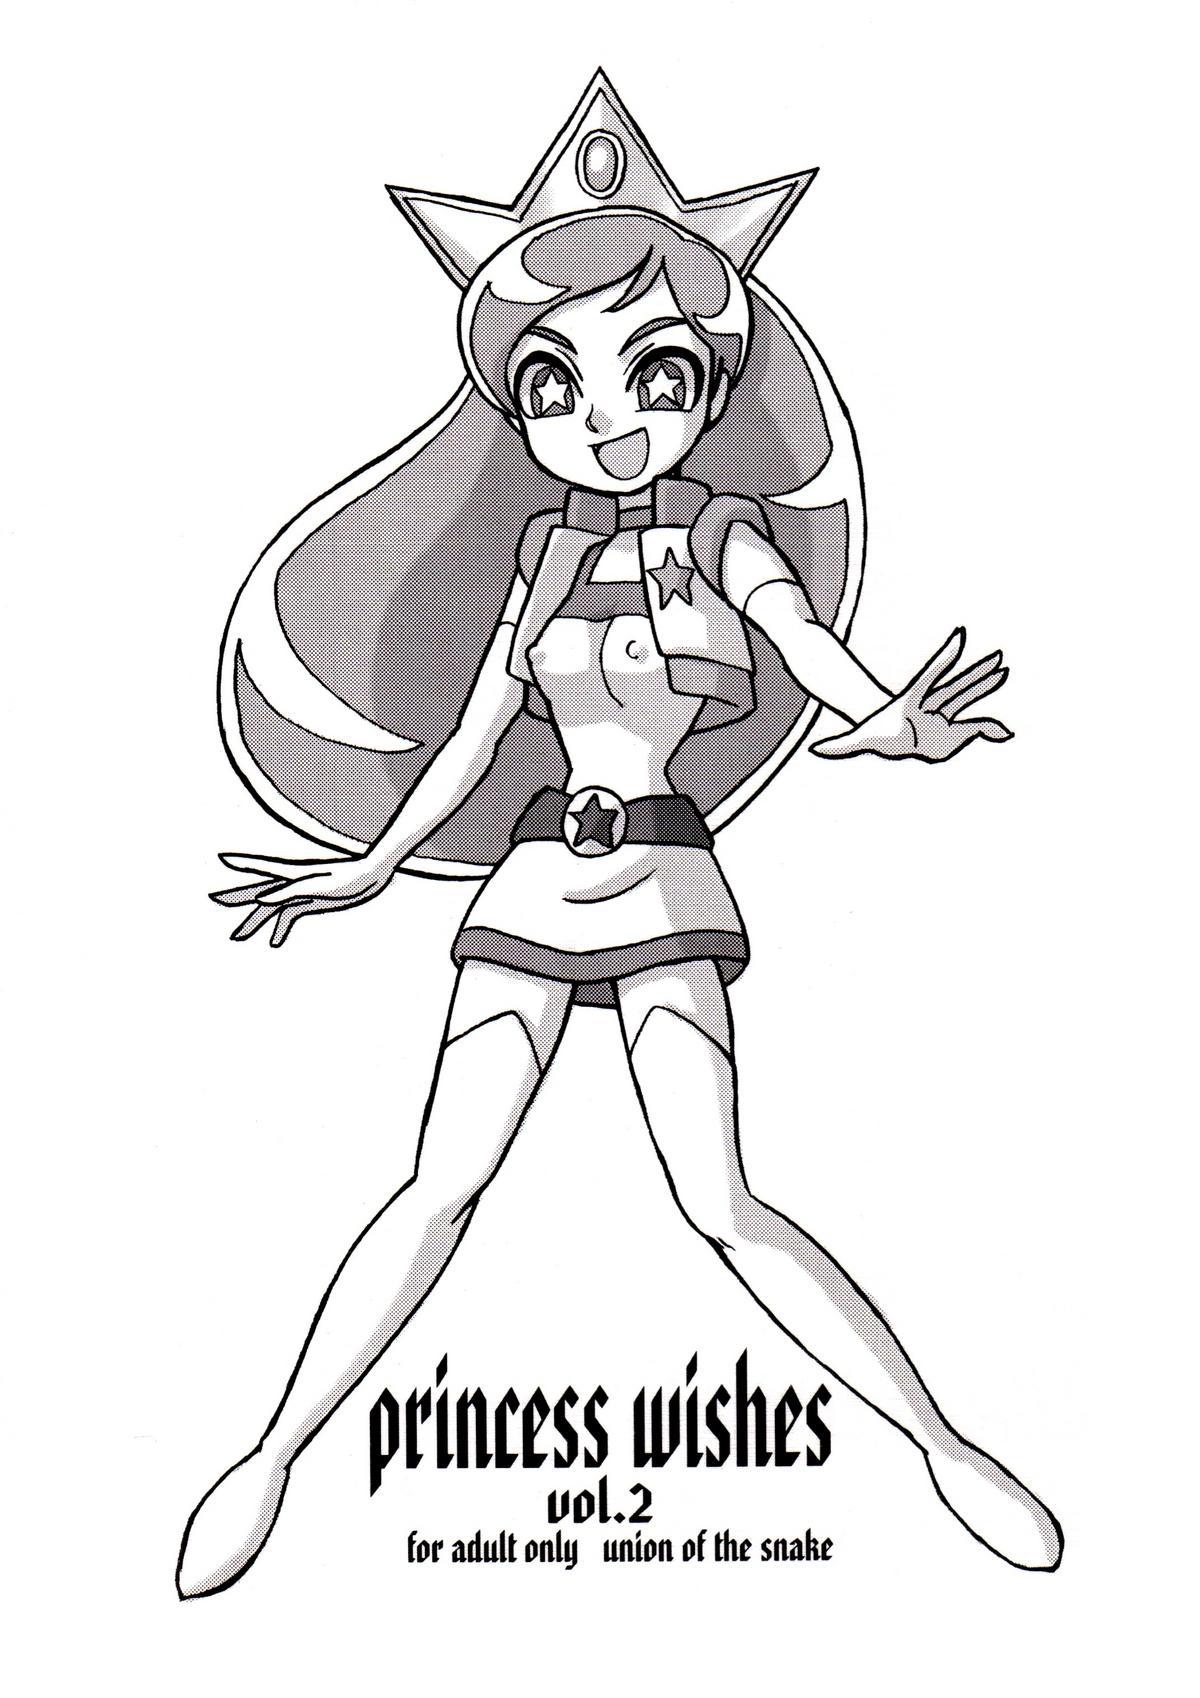 Top princess wishes vol. 2 - Powerpuff girls z First - Page 1